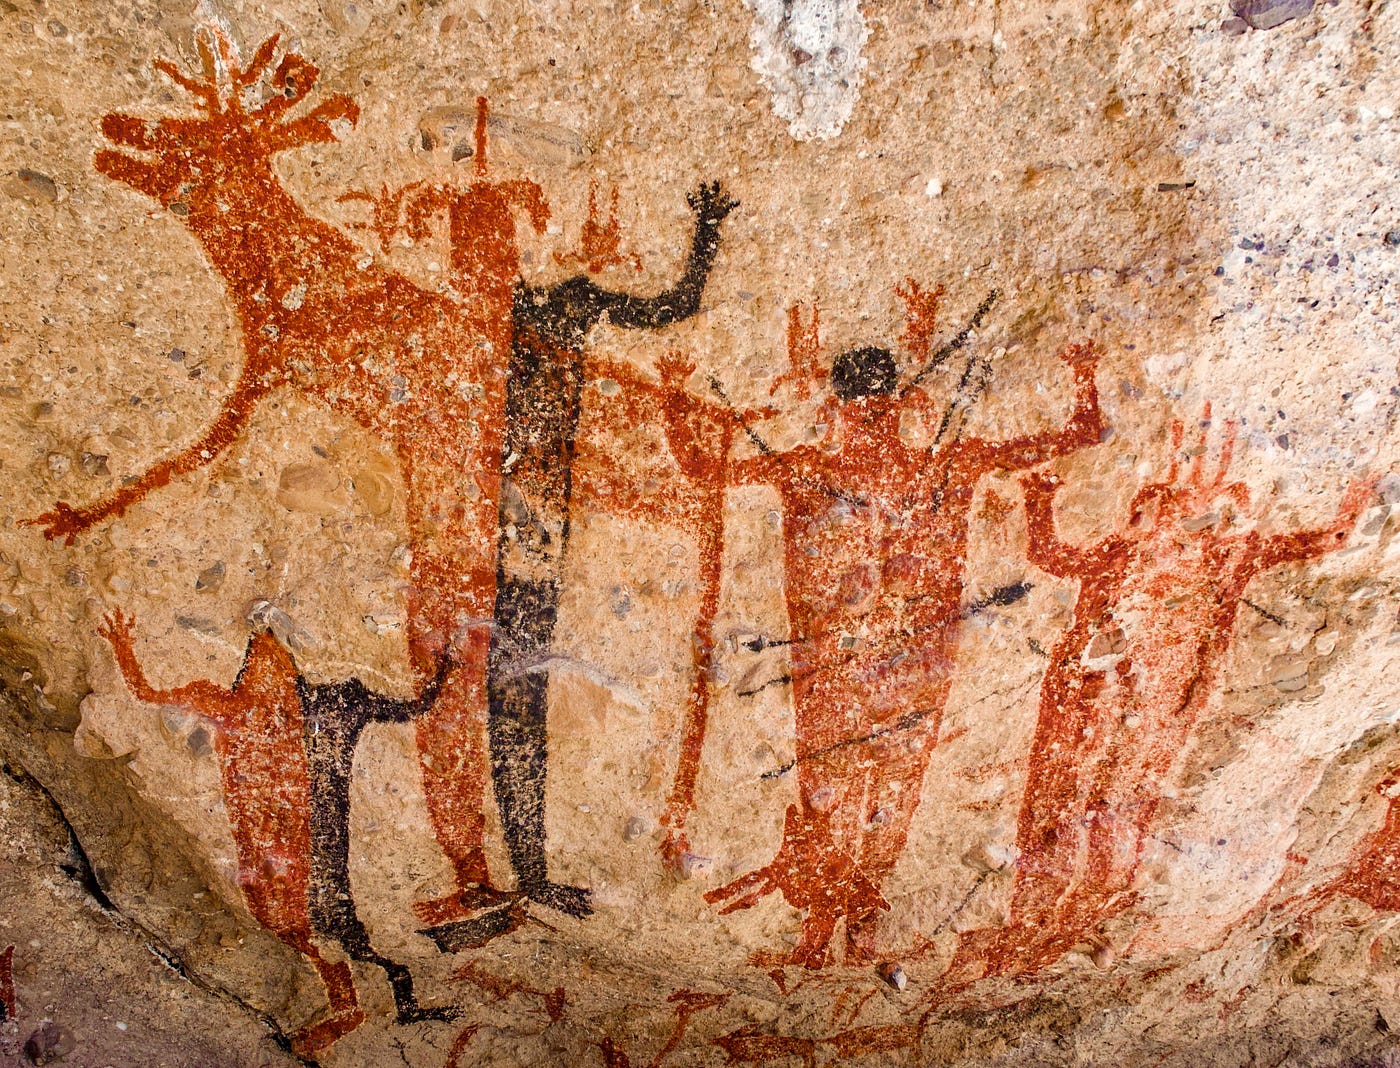 Baja Cave Paintings Far Older Than First Thought | Medium